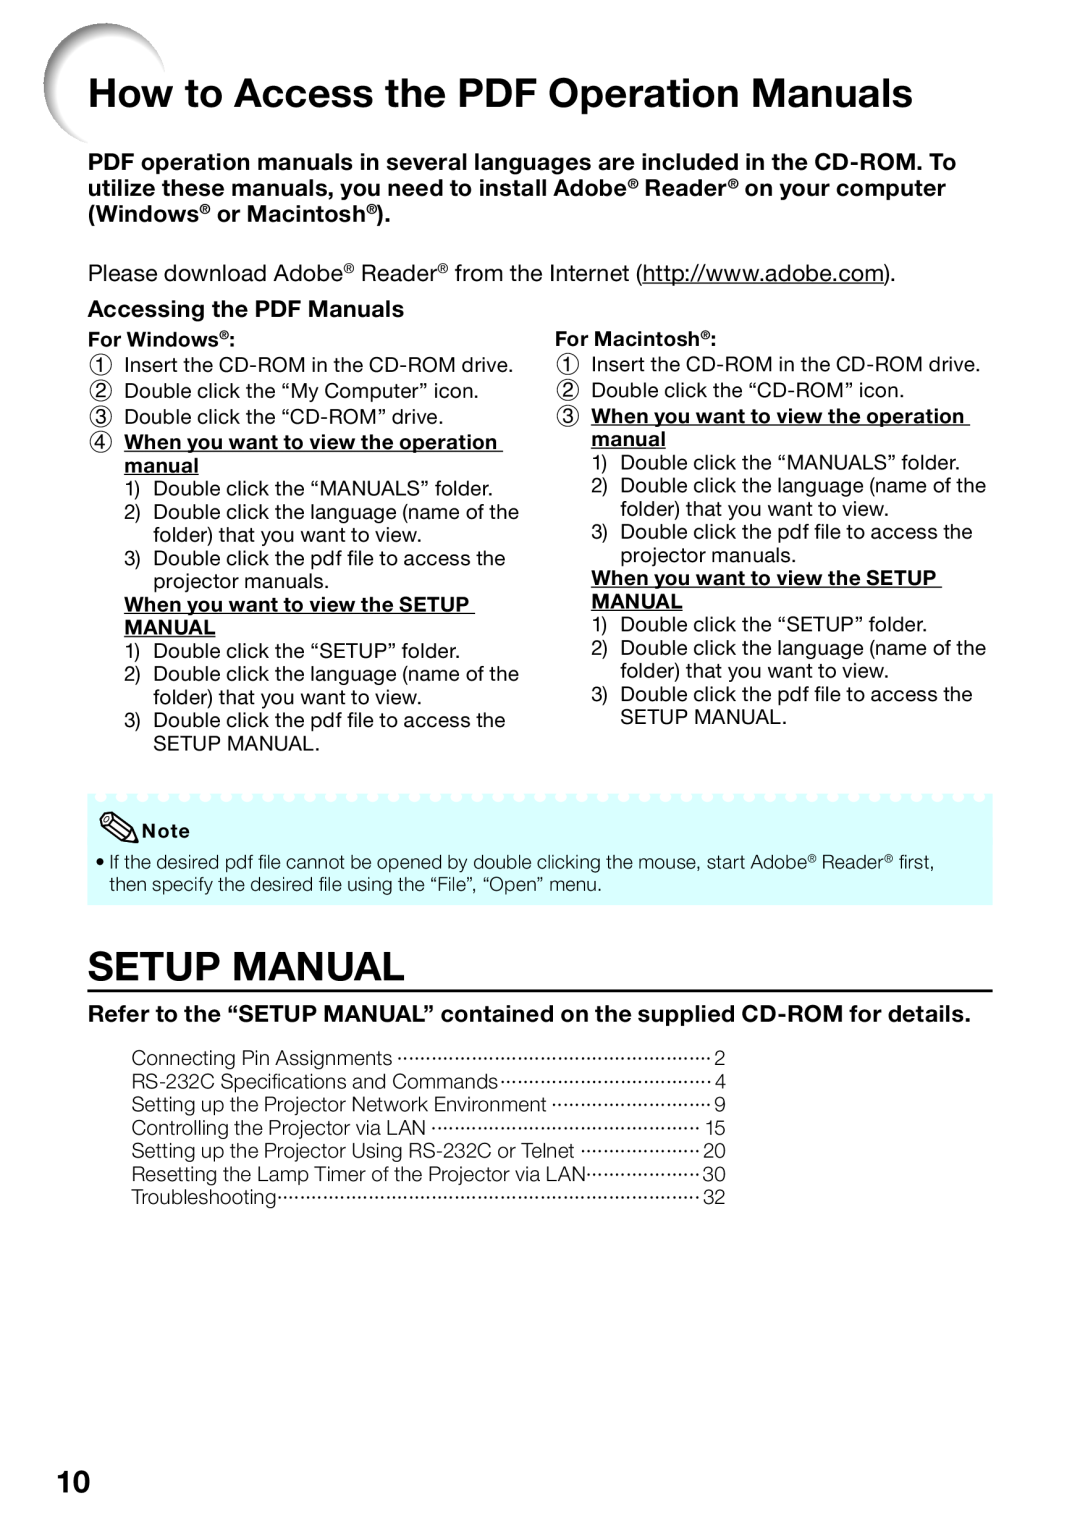 Sharp PG-D4010X quick start How to Access the PDF Operation Manuals, Setup Manual, Accessing the PDF Manuals 